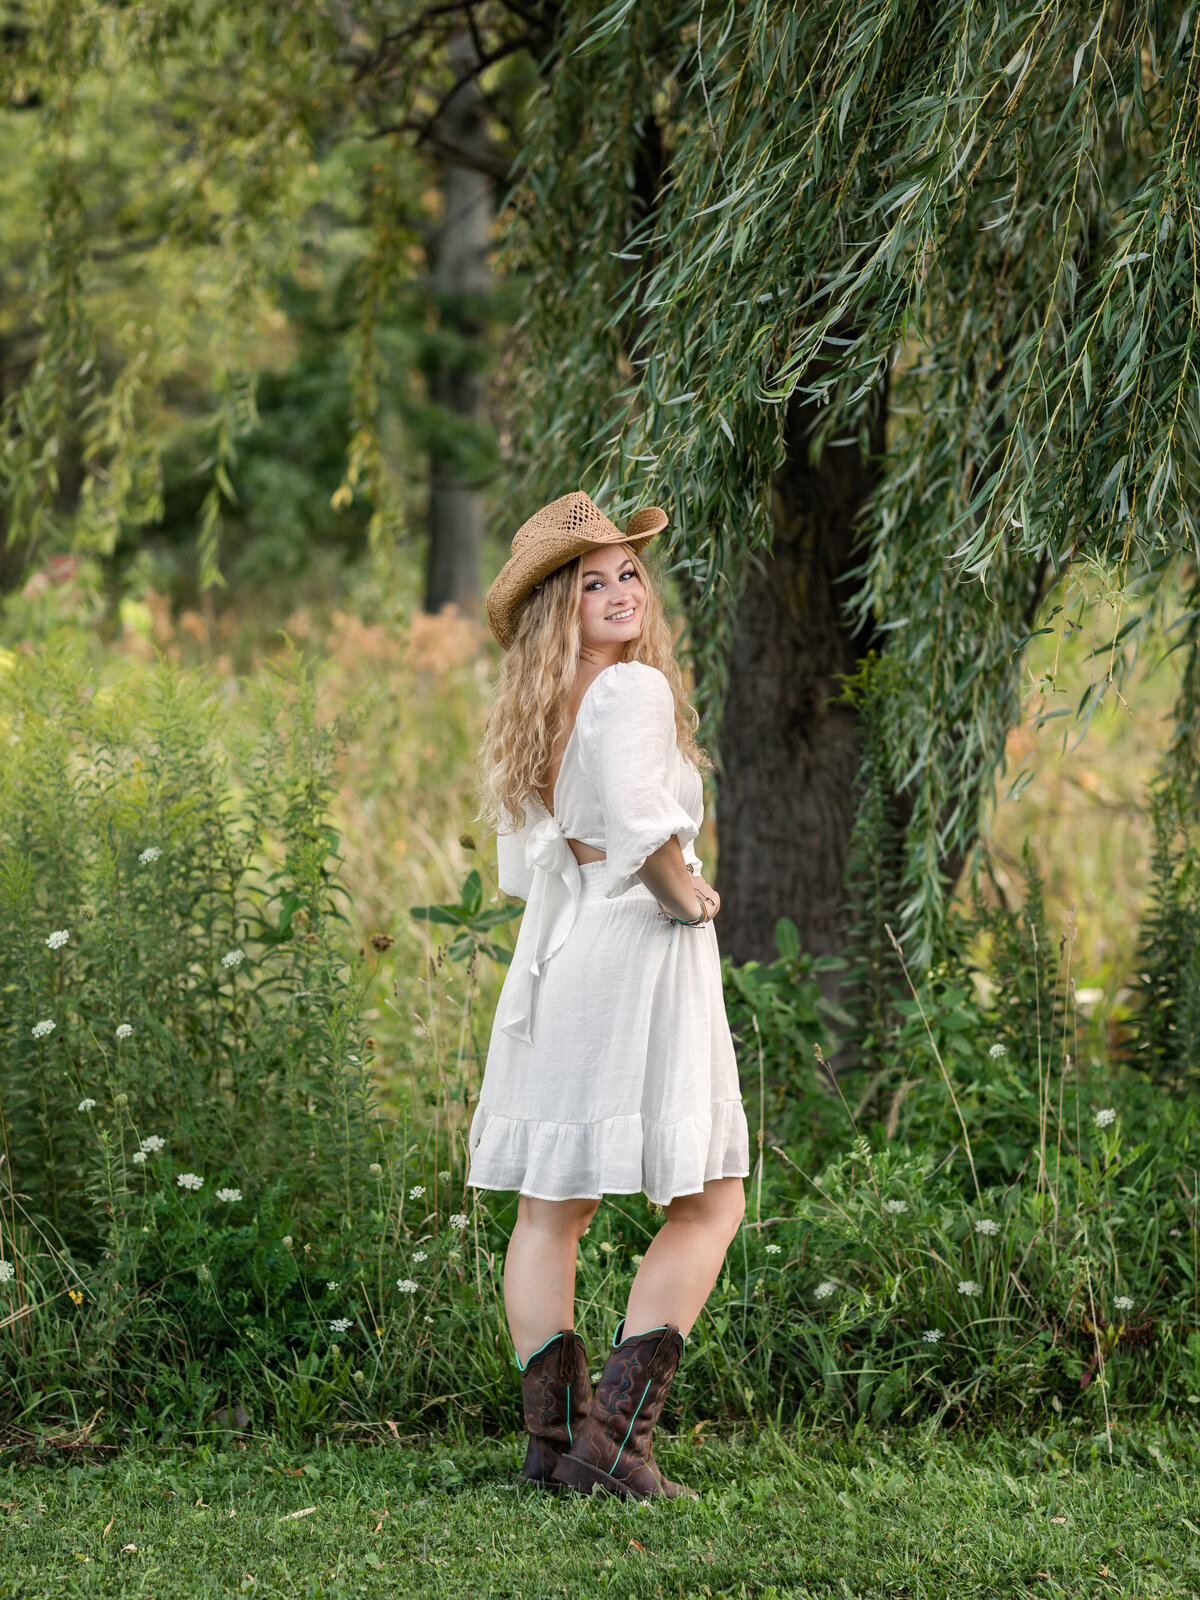 high school senior girl wearing cowboy hat for senior portraits at westcreek reservation in parma ohio